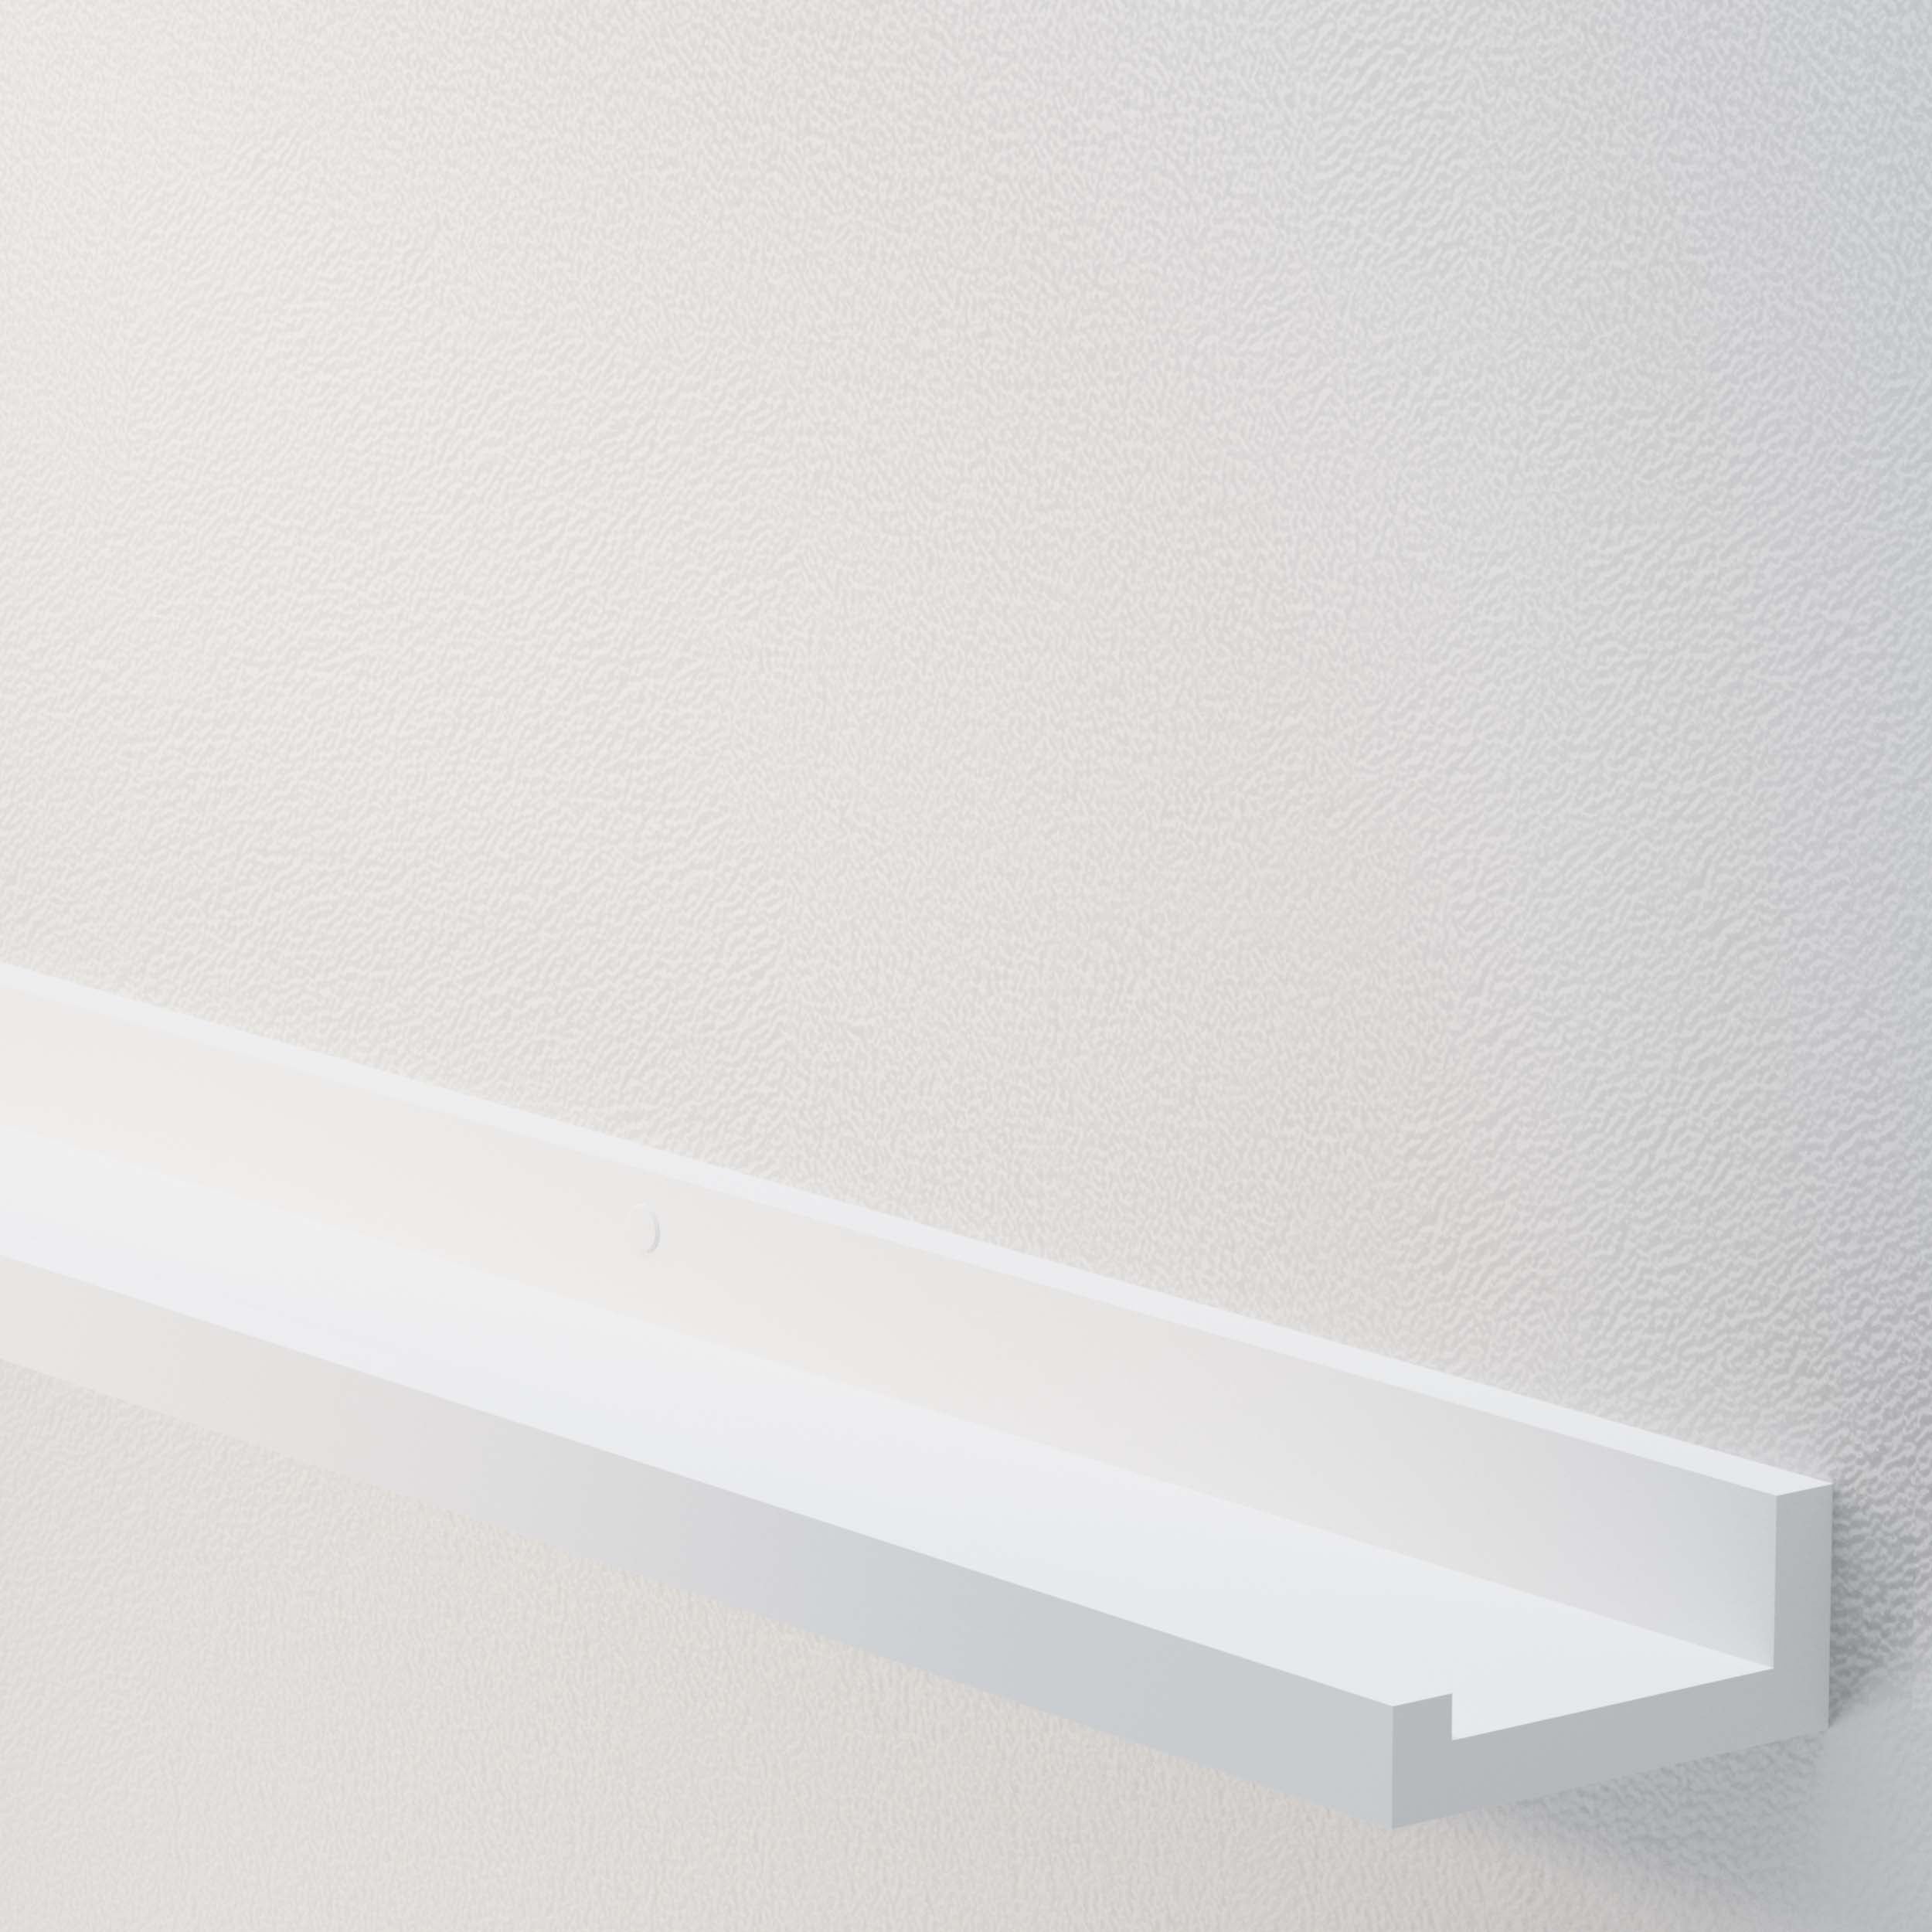 Empty white floating shelf on a textured wall.